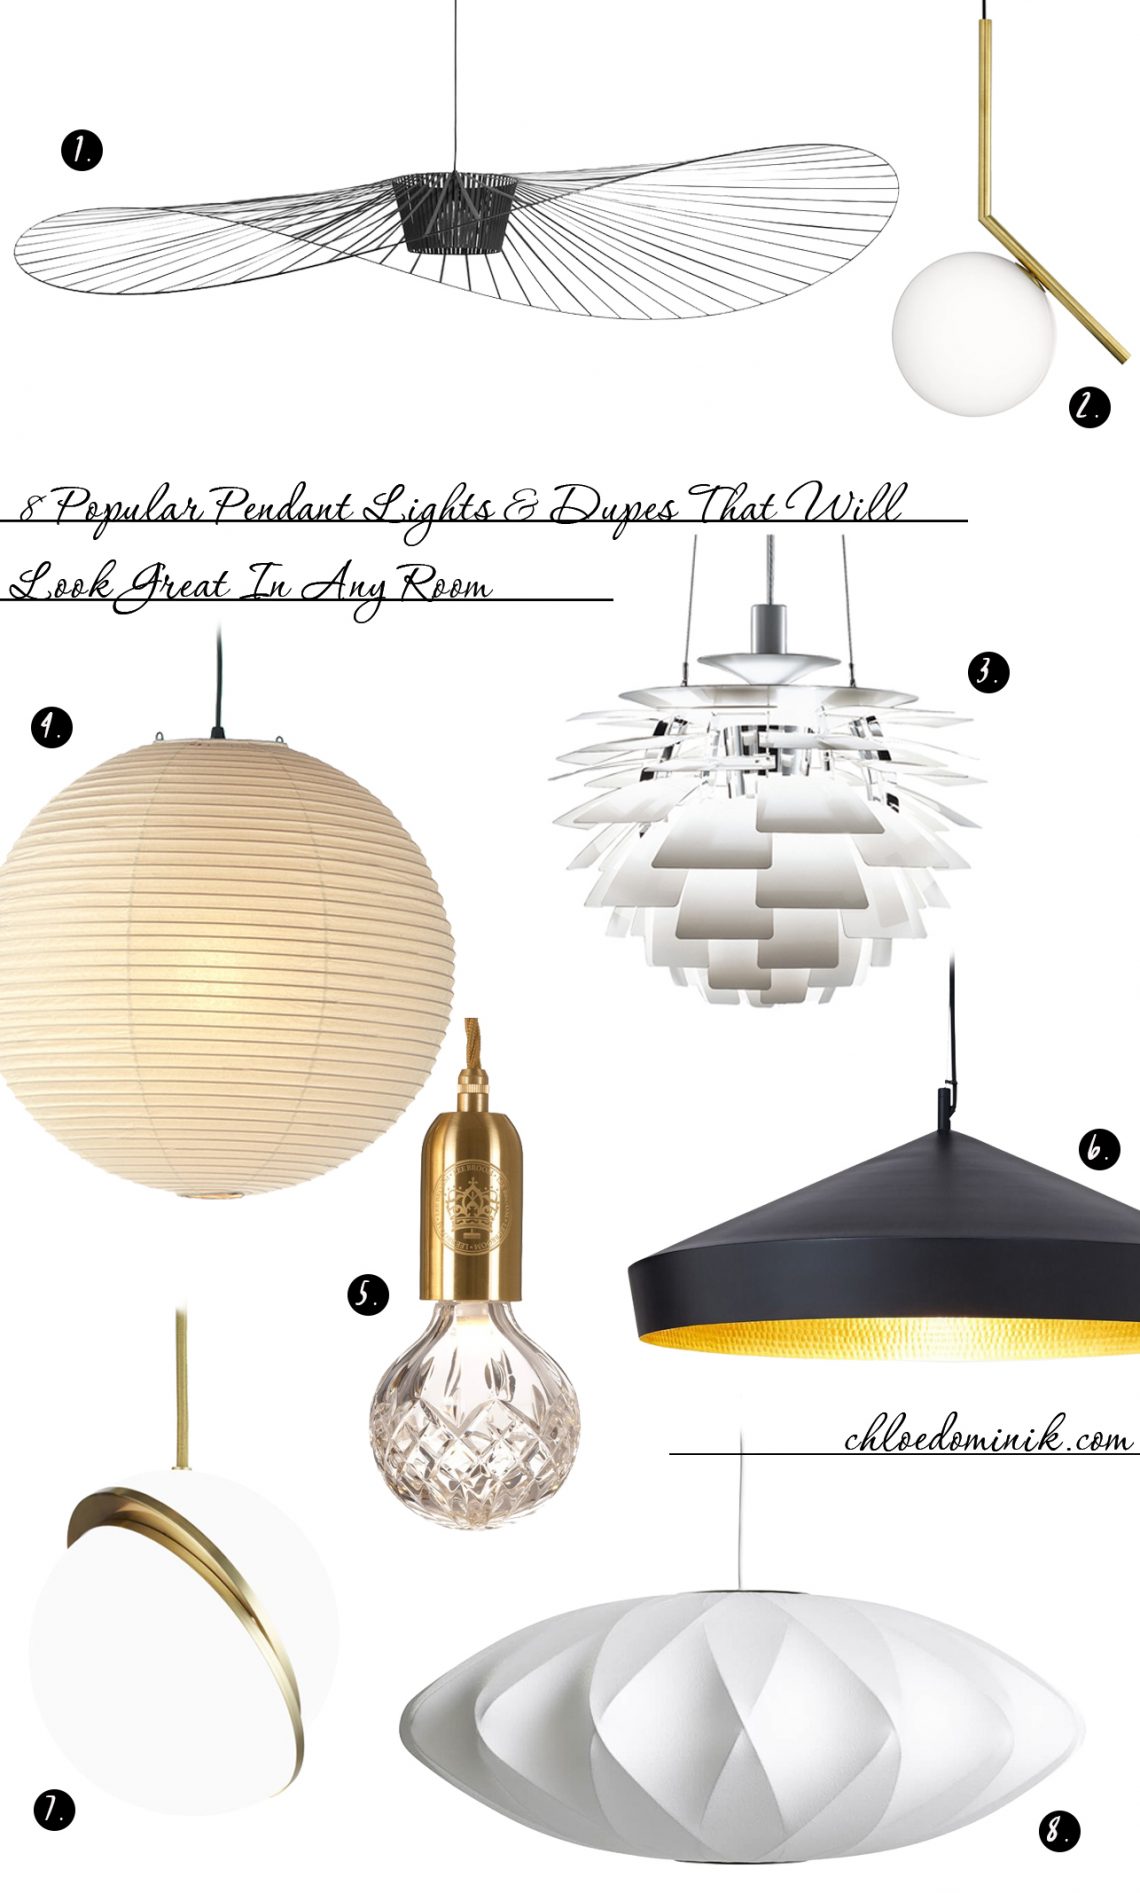 8 Popular Pendant Lights & Dupes That Will Look Great In Any Room: When it comes to interiors there are some things that can make or break the space, light fixtures being one of them! Here are 8 of some of the most popular pendant light fixtures in interior design that work great in any room space. These include designer pendant light fixtures and other alternatives to achieve a similar look. @chloedominik #pendantlights #pendantlightfixtures #popularlightfixtures #pendantlightdesign